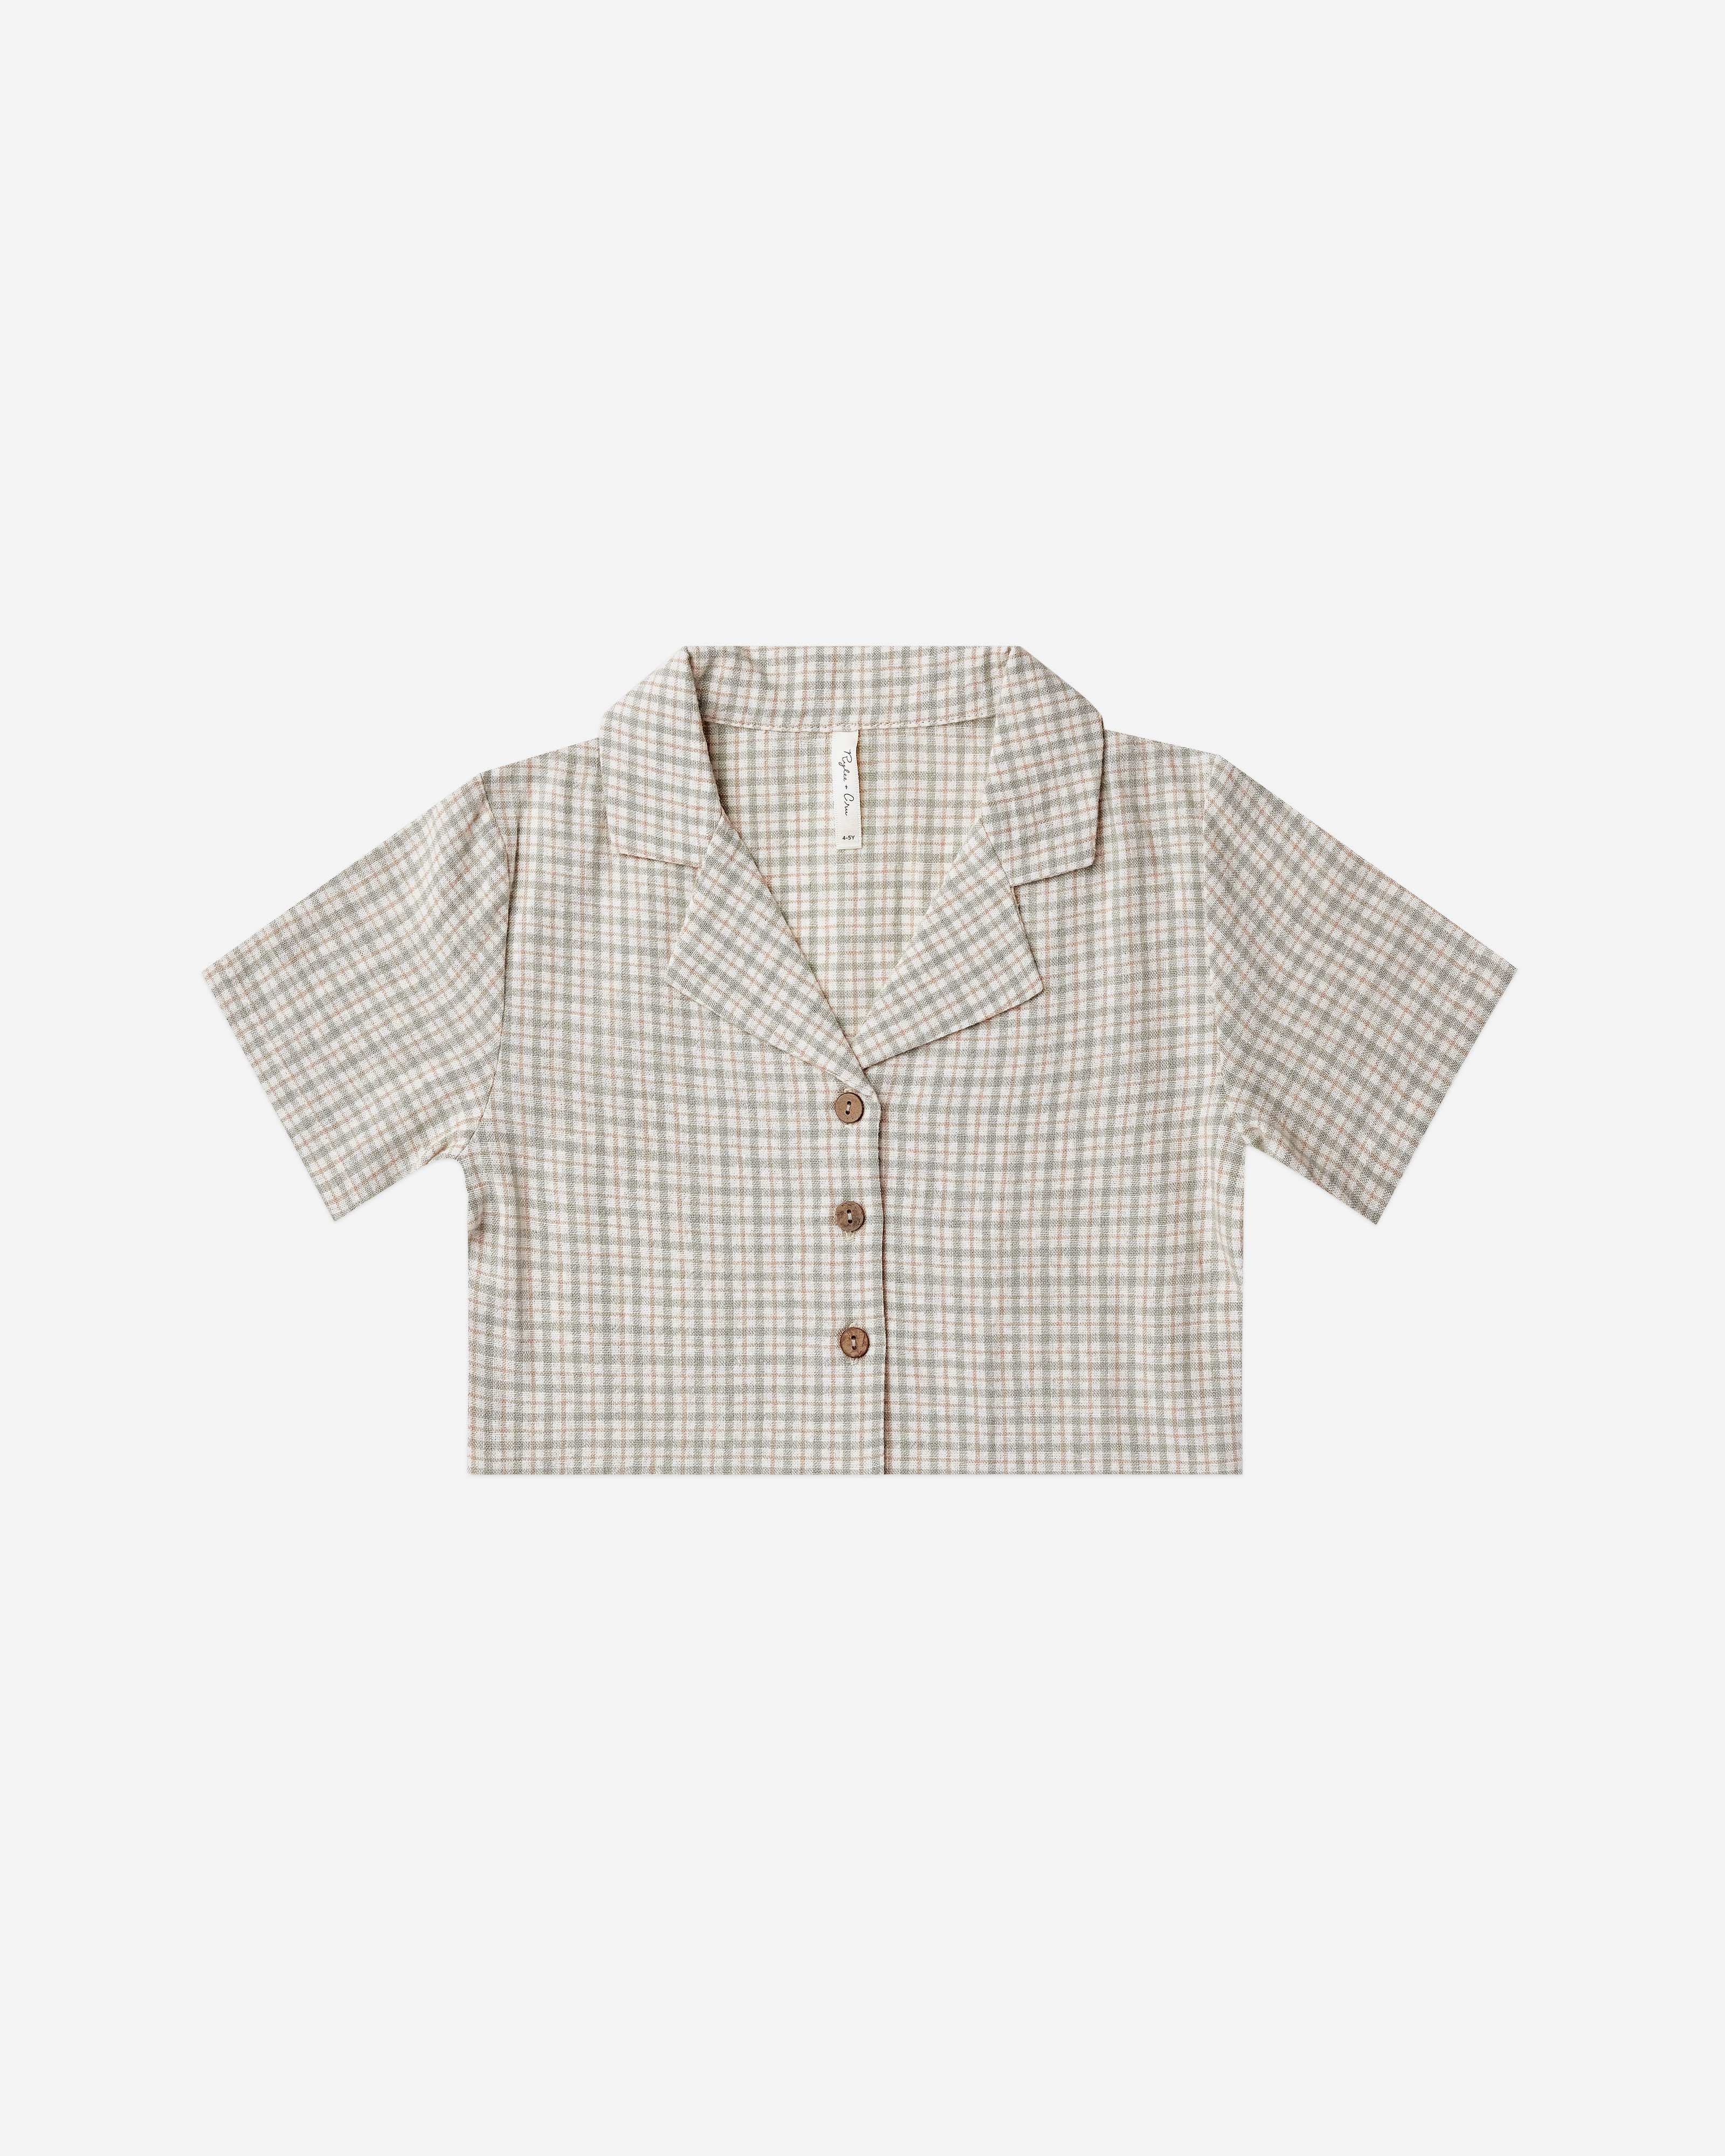 cropped collared shirt || laurel plaid - Rylee + Cru | Kids Clothes | Trendy Baby Clothes | Modern Infant Outfits |